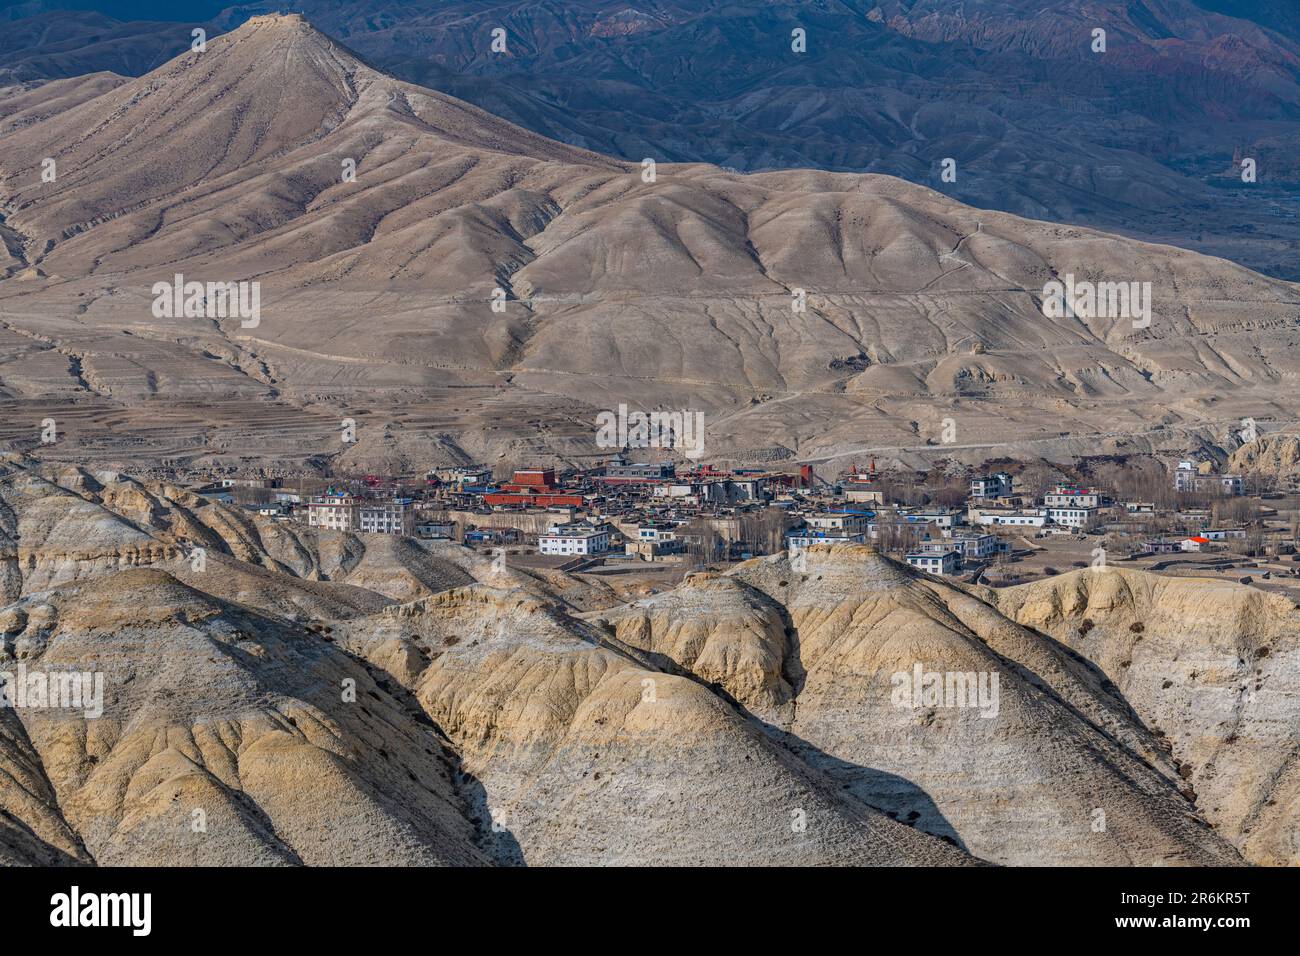 Lo Manthang, capital of Upper Mustang, viewed from a distance amidst a barren desertic landscape, Kingdom of Mustang, Himalayas, Nepal, Asia Stock Photo